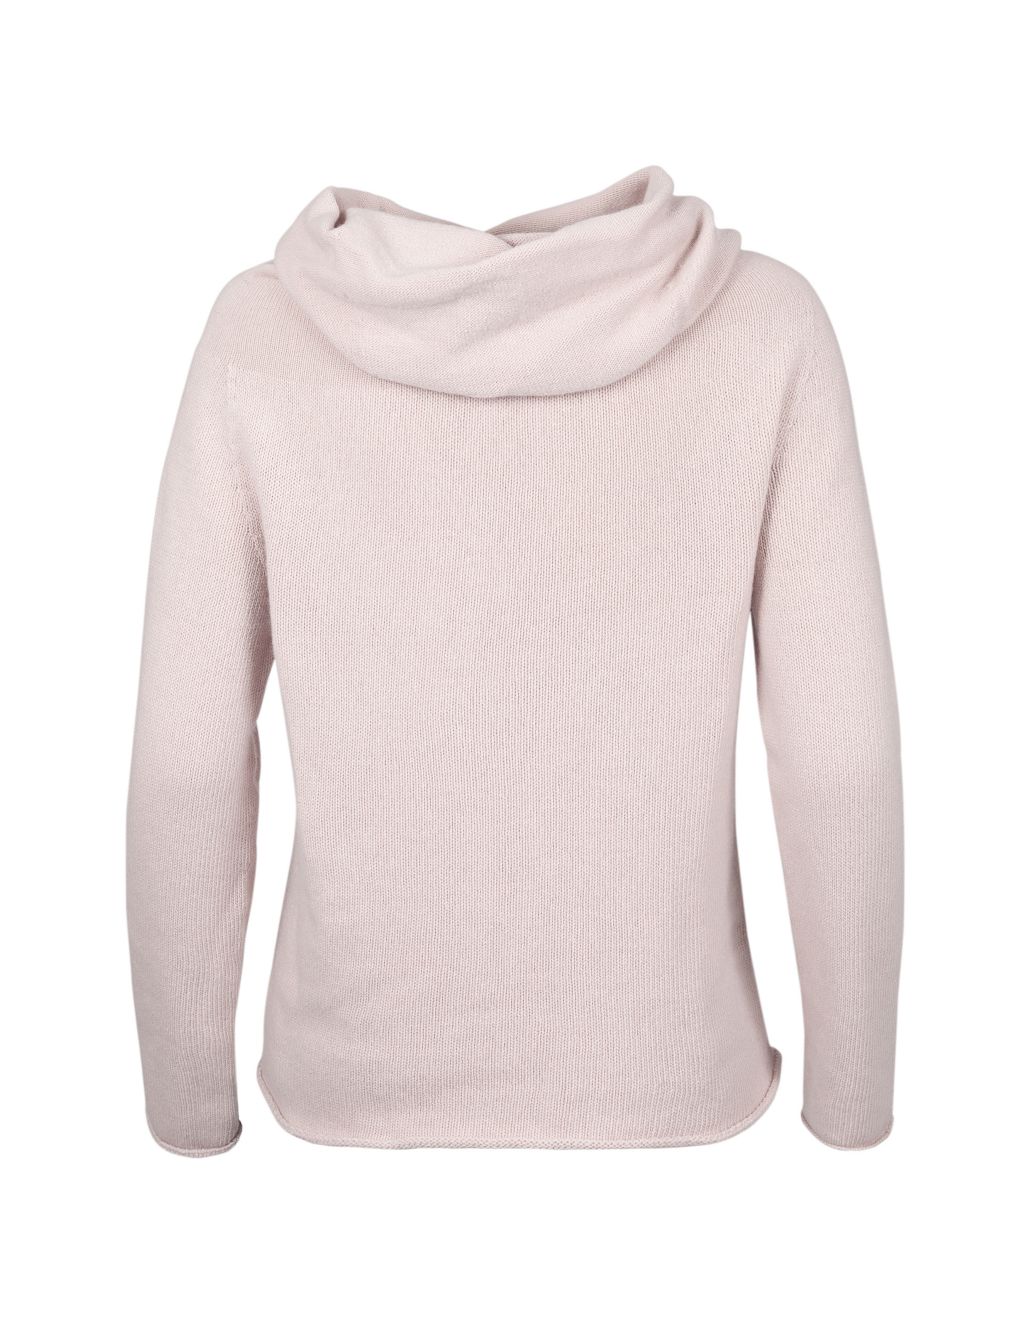 Pure Wool Hooded Neck Jumper image 3